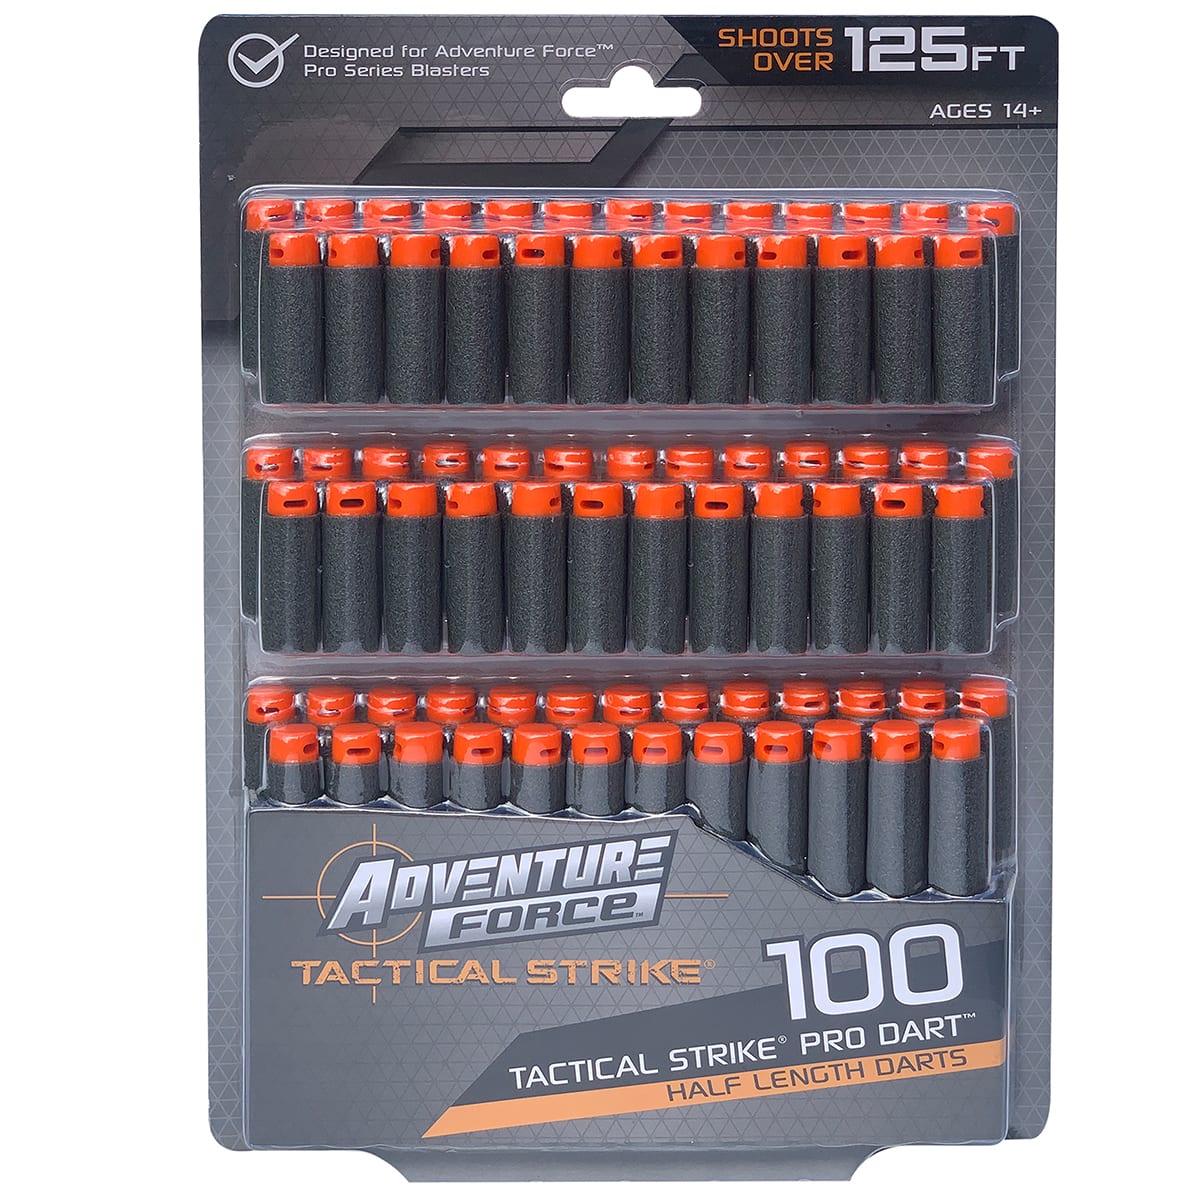 Adventure Force 50 Tactical Strike Rounds Orange Balls Ages 14 for sale online 